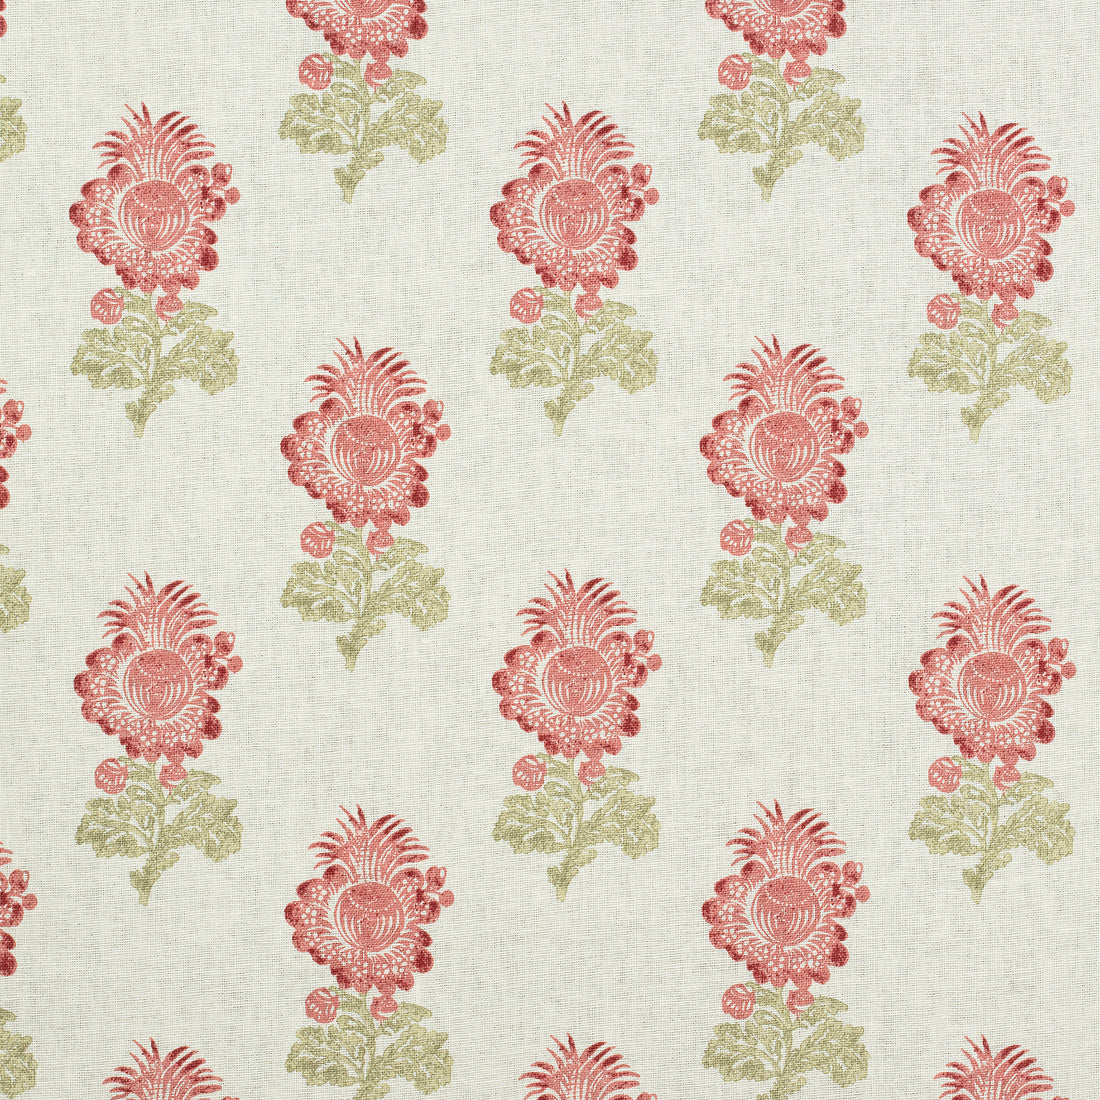 Aldith fabric in red and green color - pattern number F972606 - by Thibaut in the Chestnut Hill collection